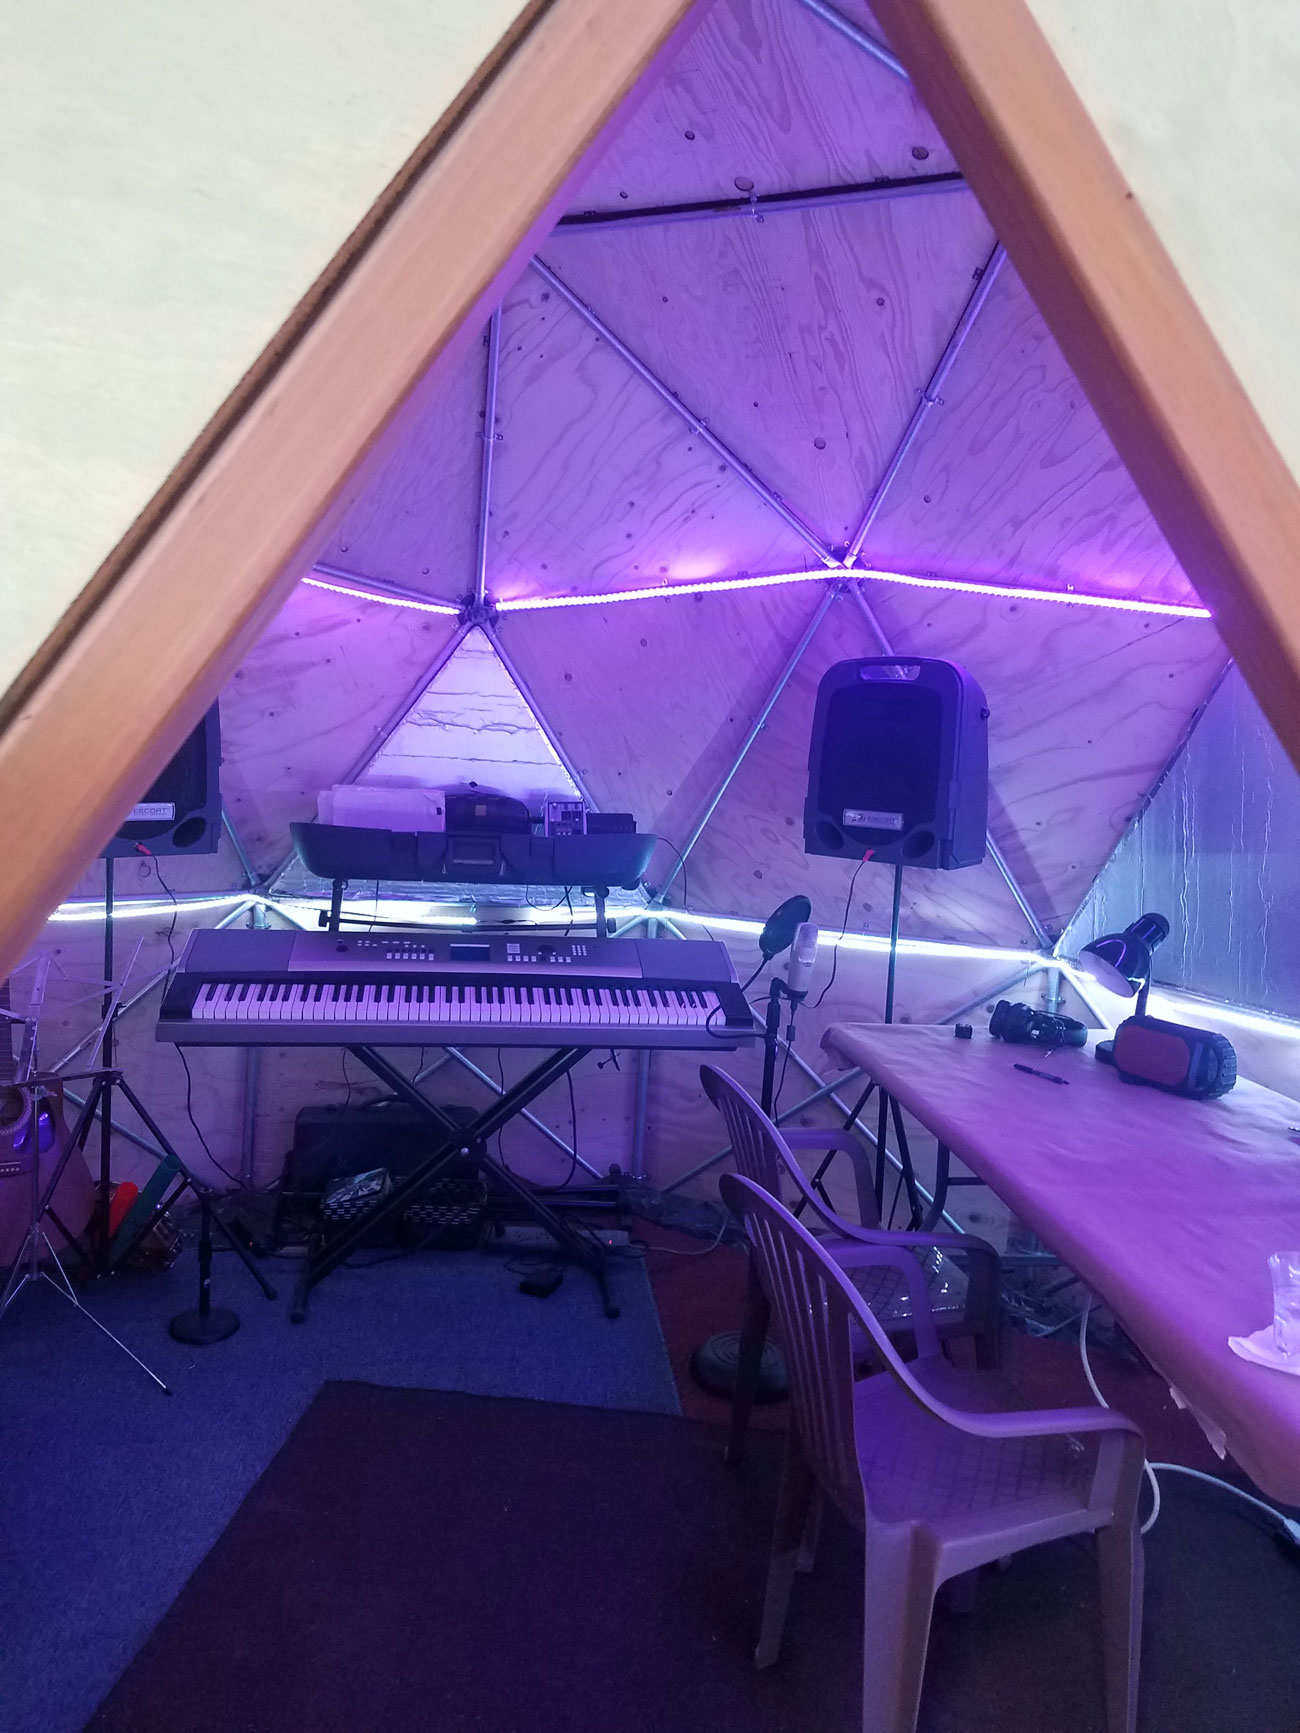 Dome-music-studio-shop=storage-guest-room-affordable-housing